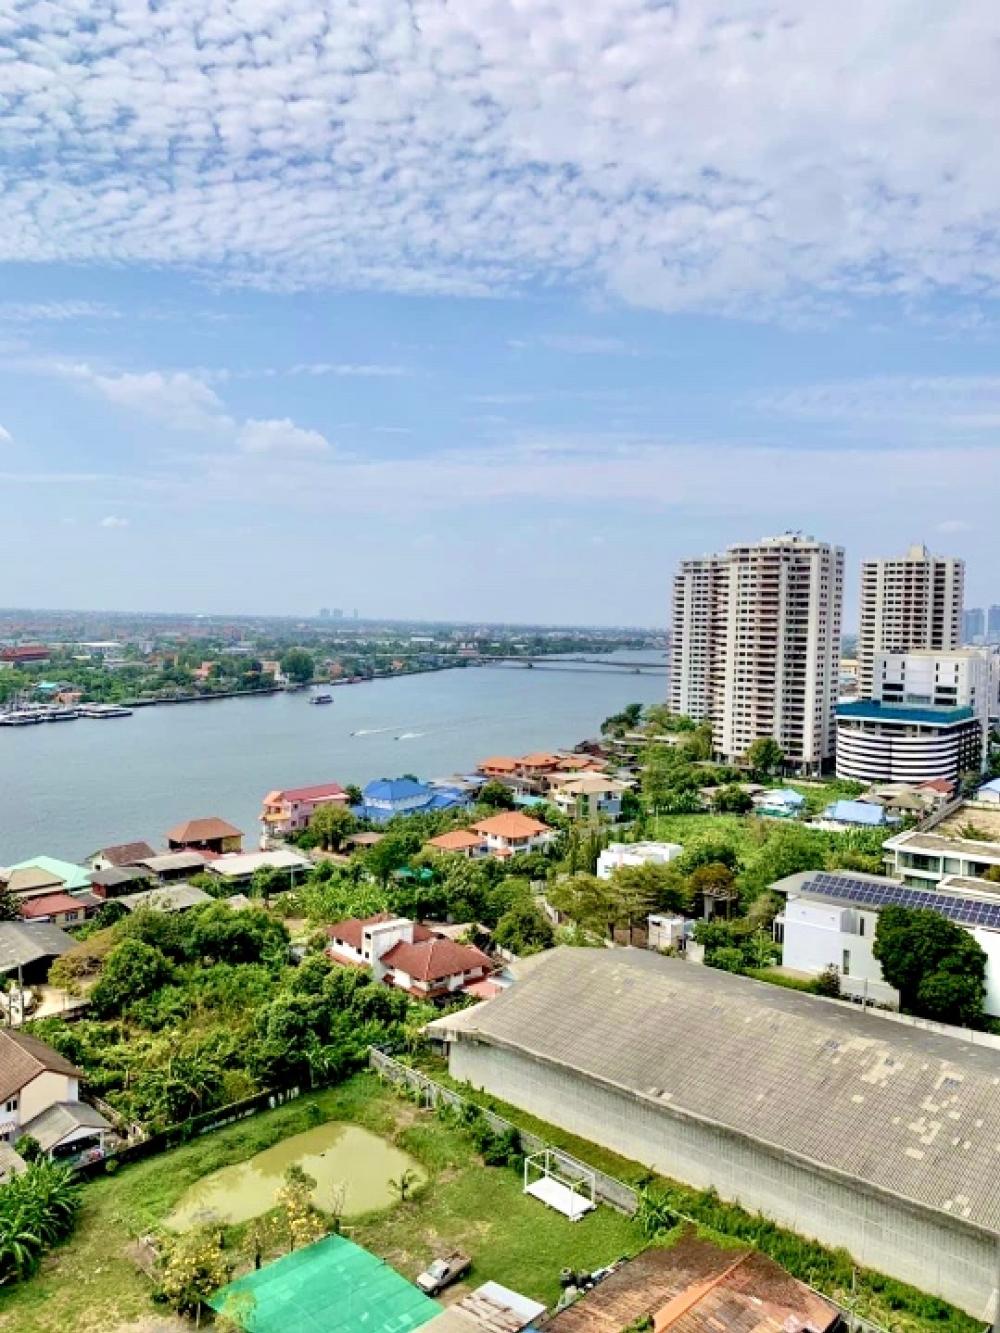 For SaleCondoRattanathibet, Sanambinna : Condo for sale LPN Pibulsongkram, 2 bedrooms, 59.5 sq m, river view, high floor, corner room, newly decorated, built-in throughout the room. Fully furnished You can drag your bags in and move in.